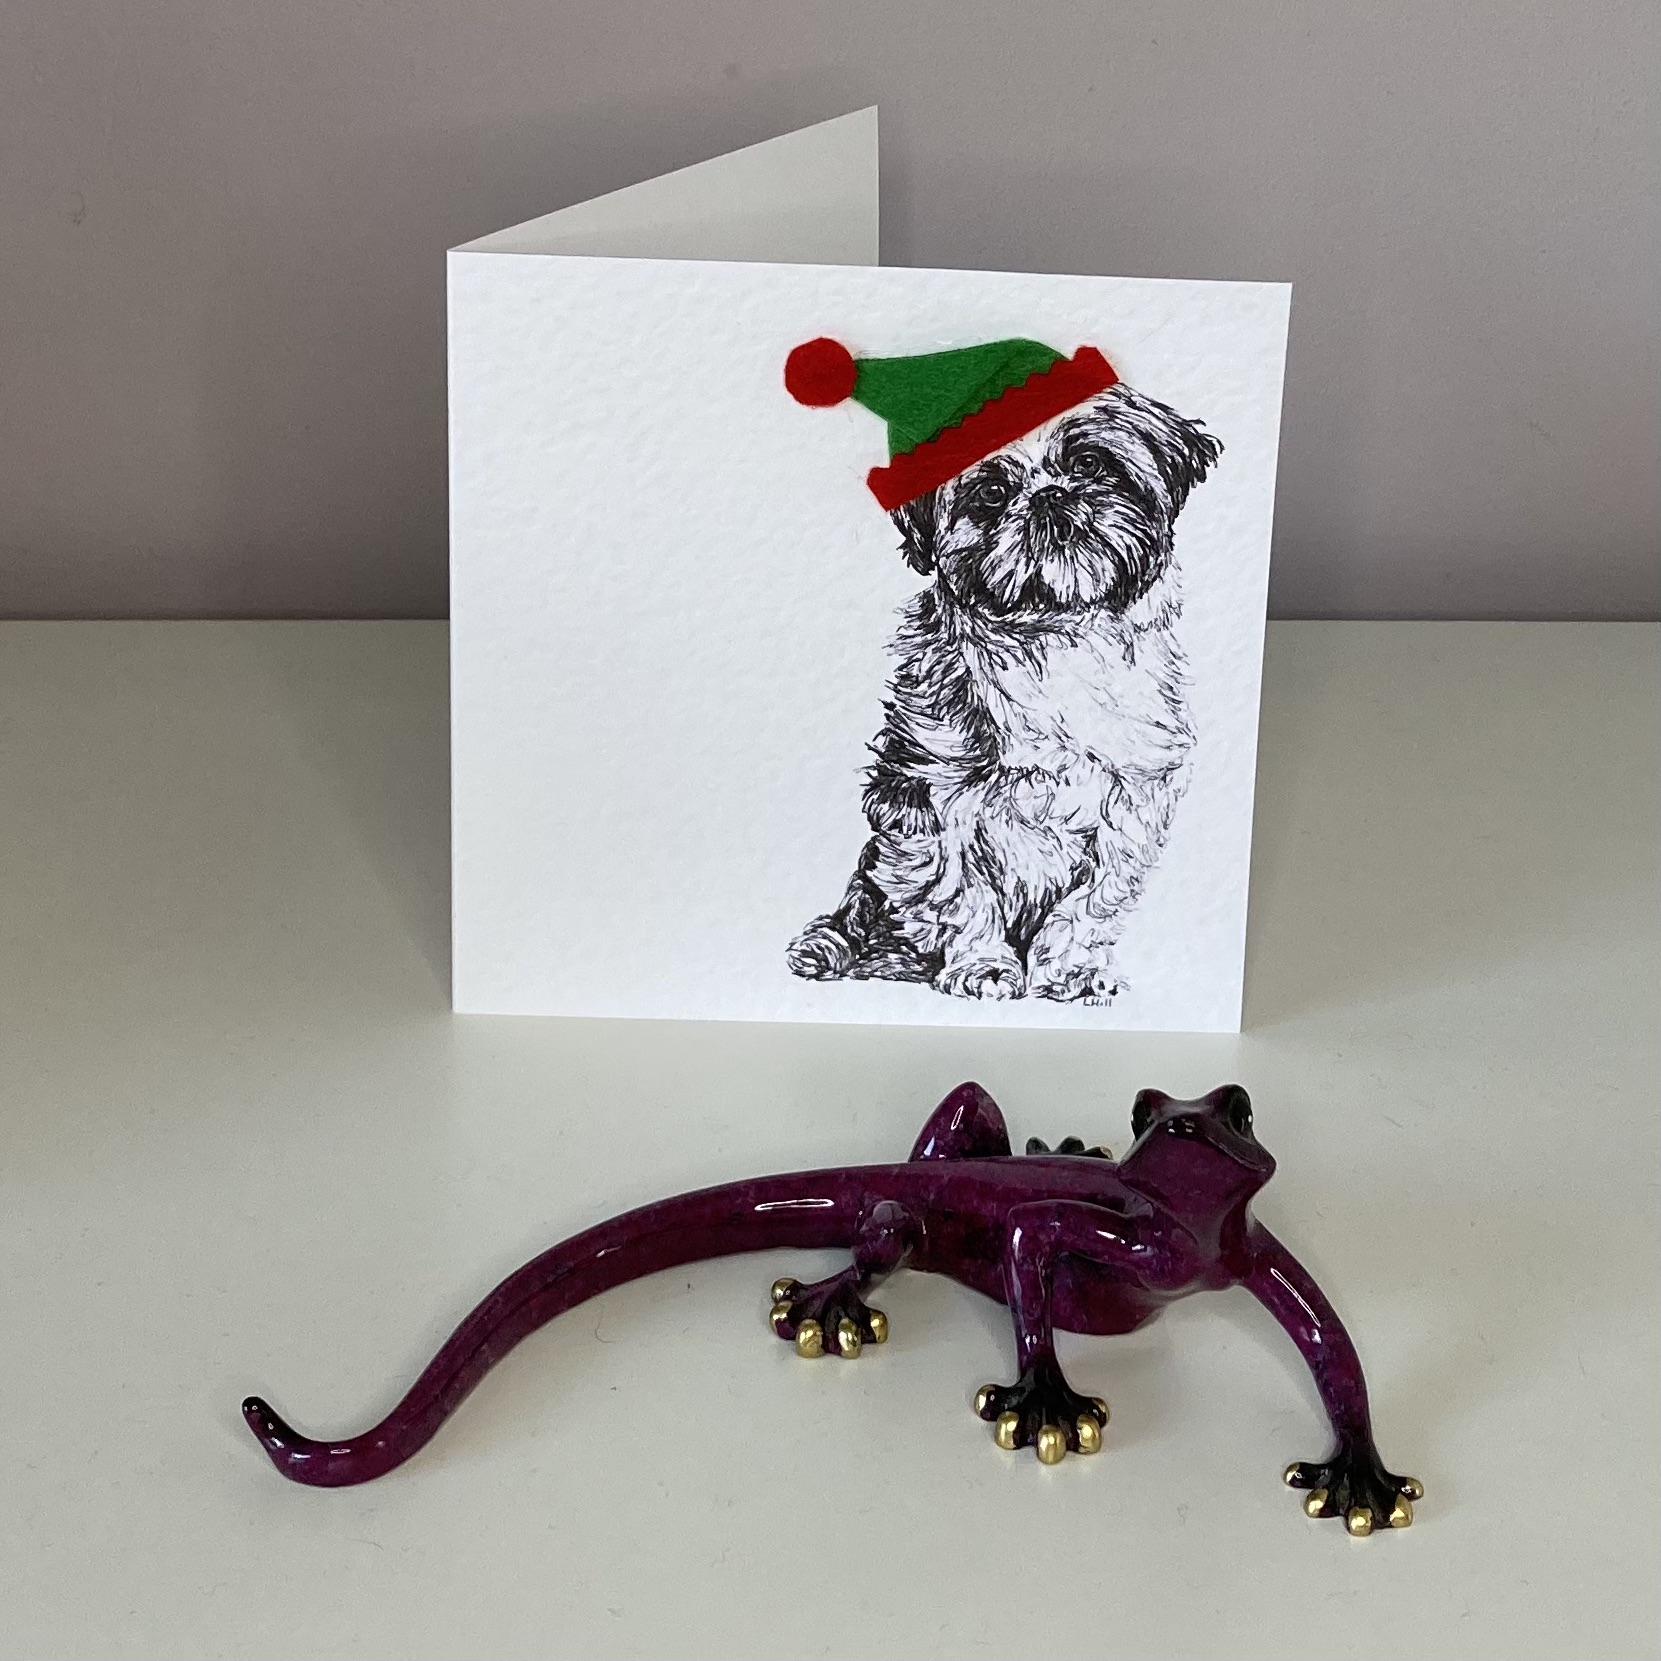 Shih Tzu with elf hat Christmas card by Louisa Hill